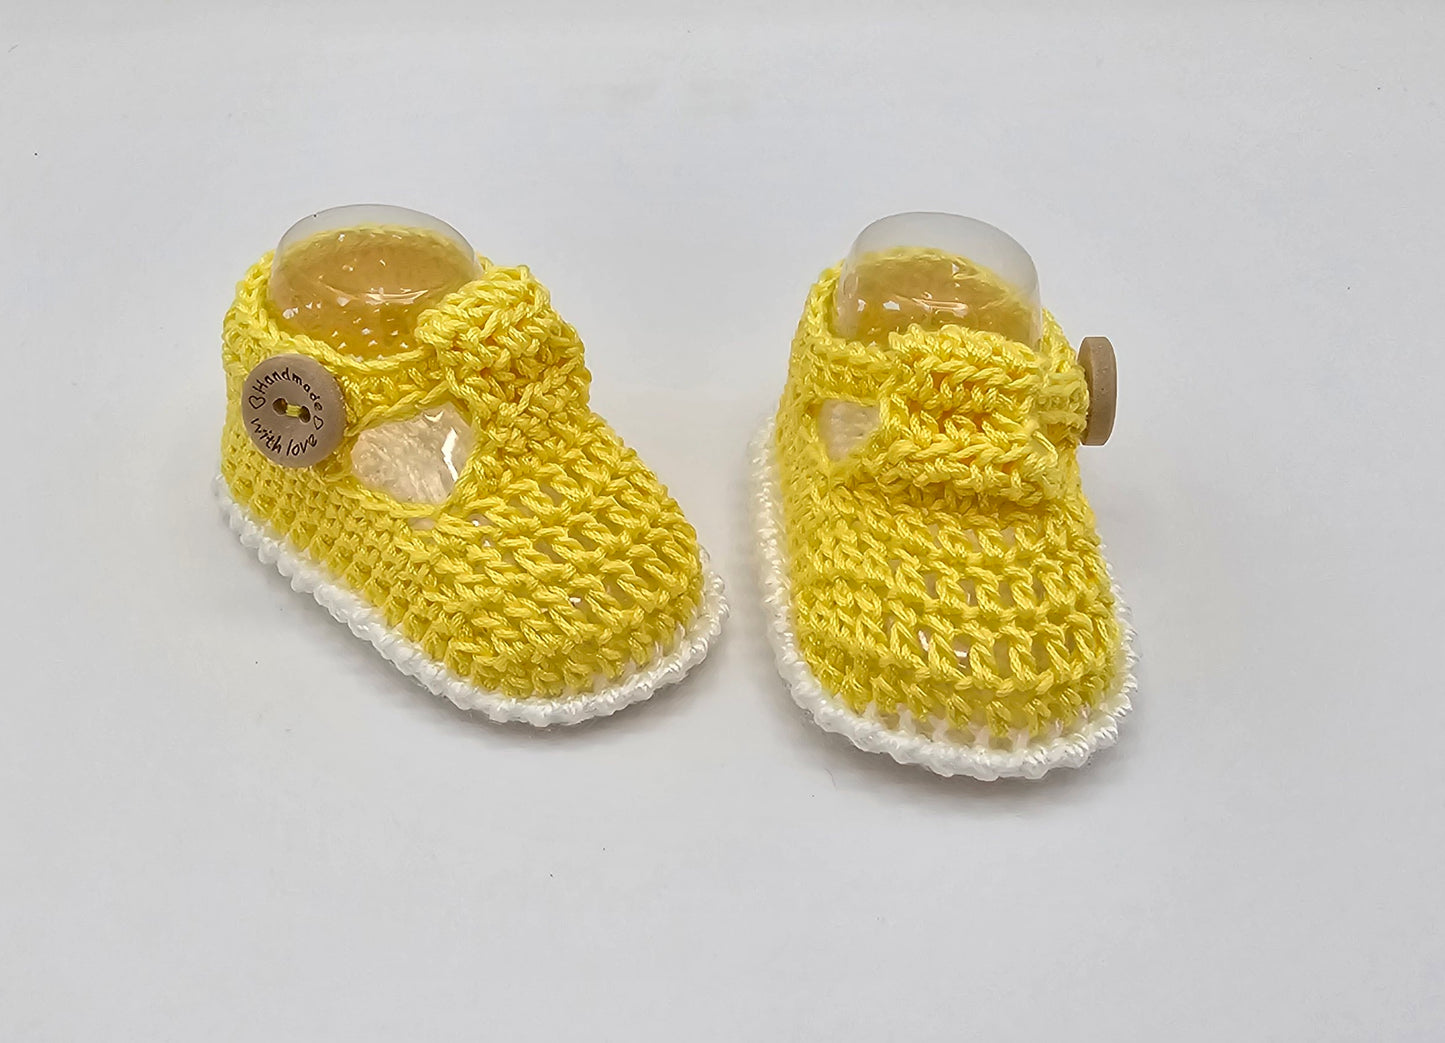 Unisex Overalls and Shoes 0-3 months